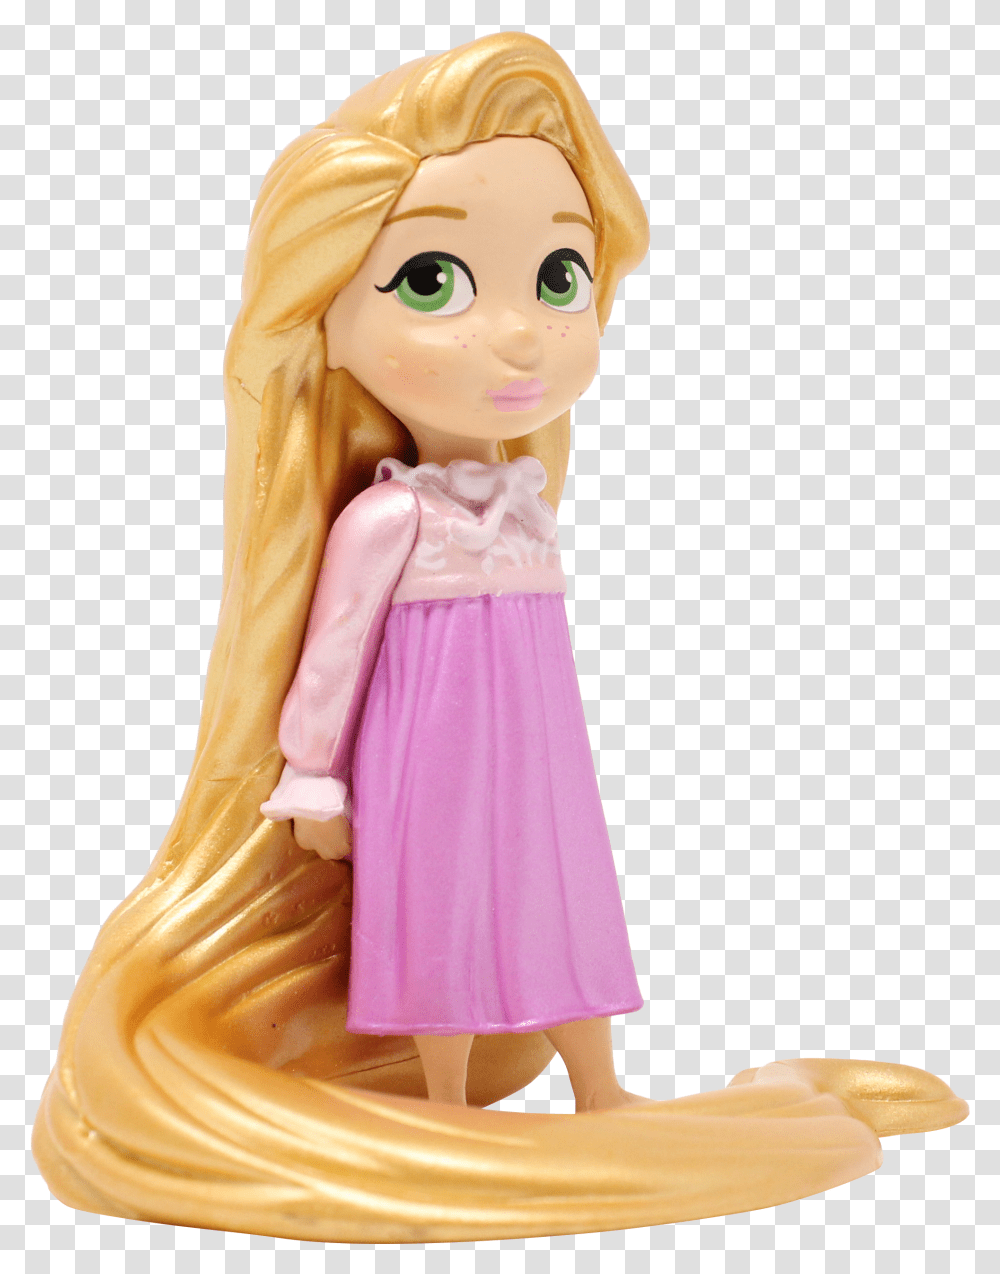 Rapunzel Toy Background Grow Long Hair Like Rapunzel, Doll, Wedding Gown, Robe, Fashion Transparent Png